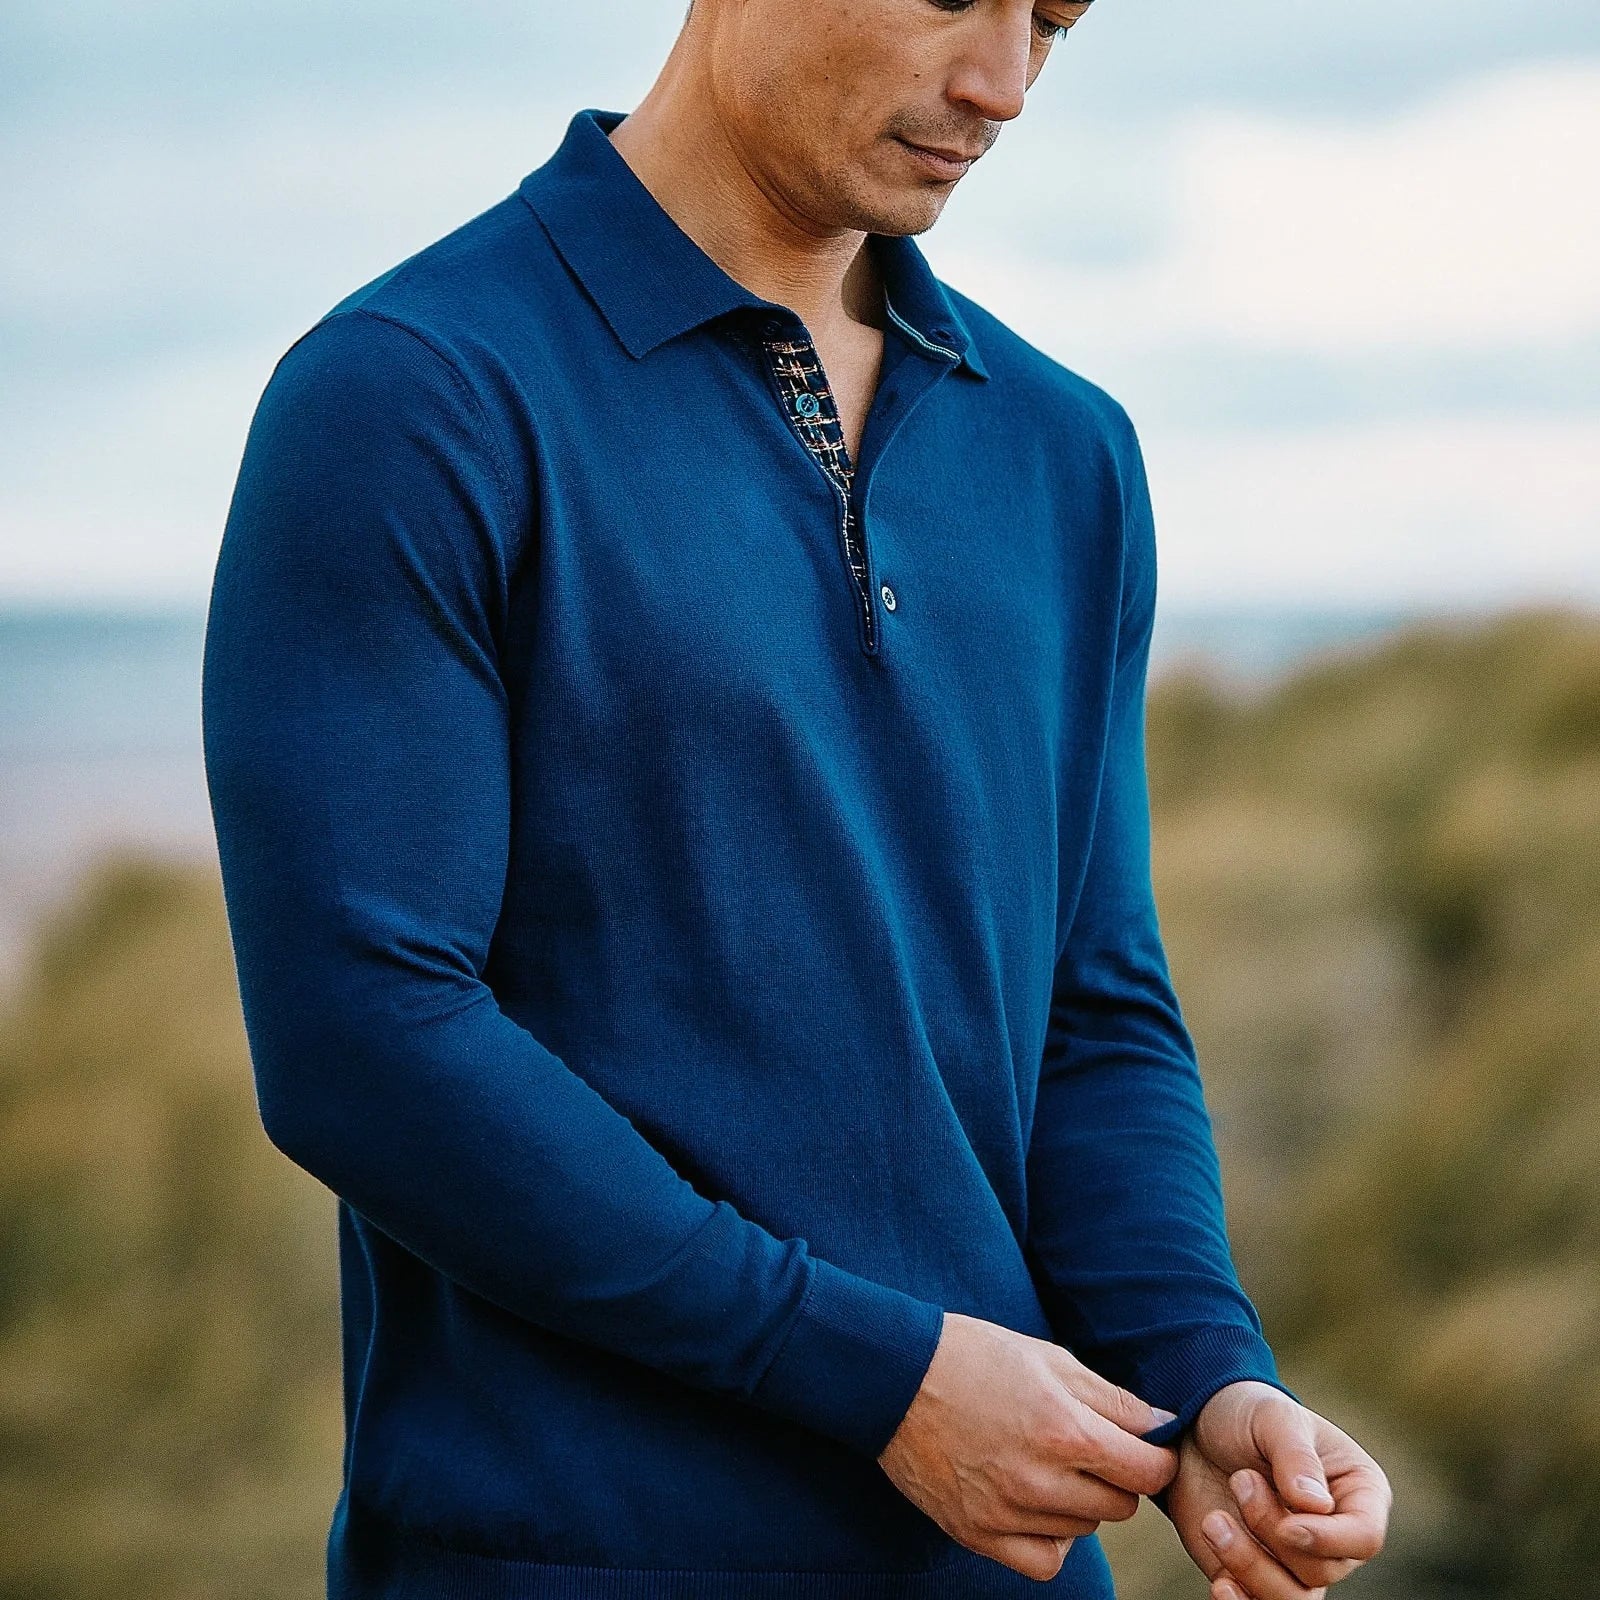 Warmth in Winter, Cool in Summer: The Dual Climate Comfort of Cashmere - Blake Mill